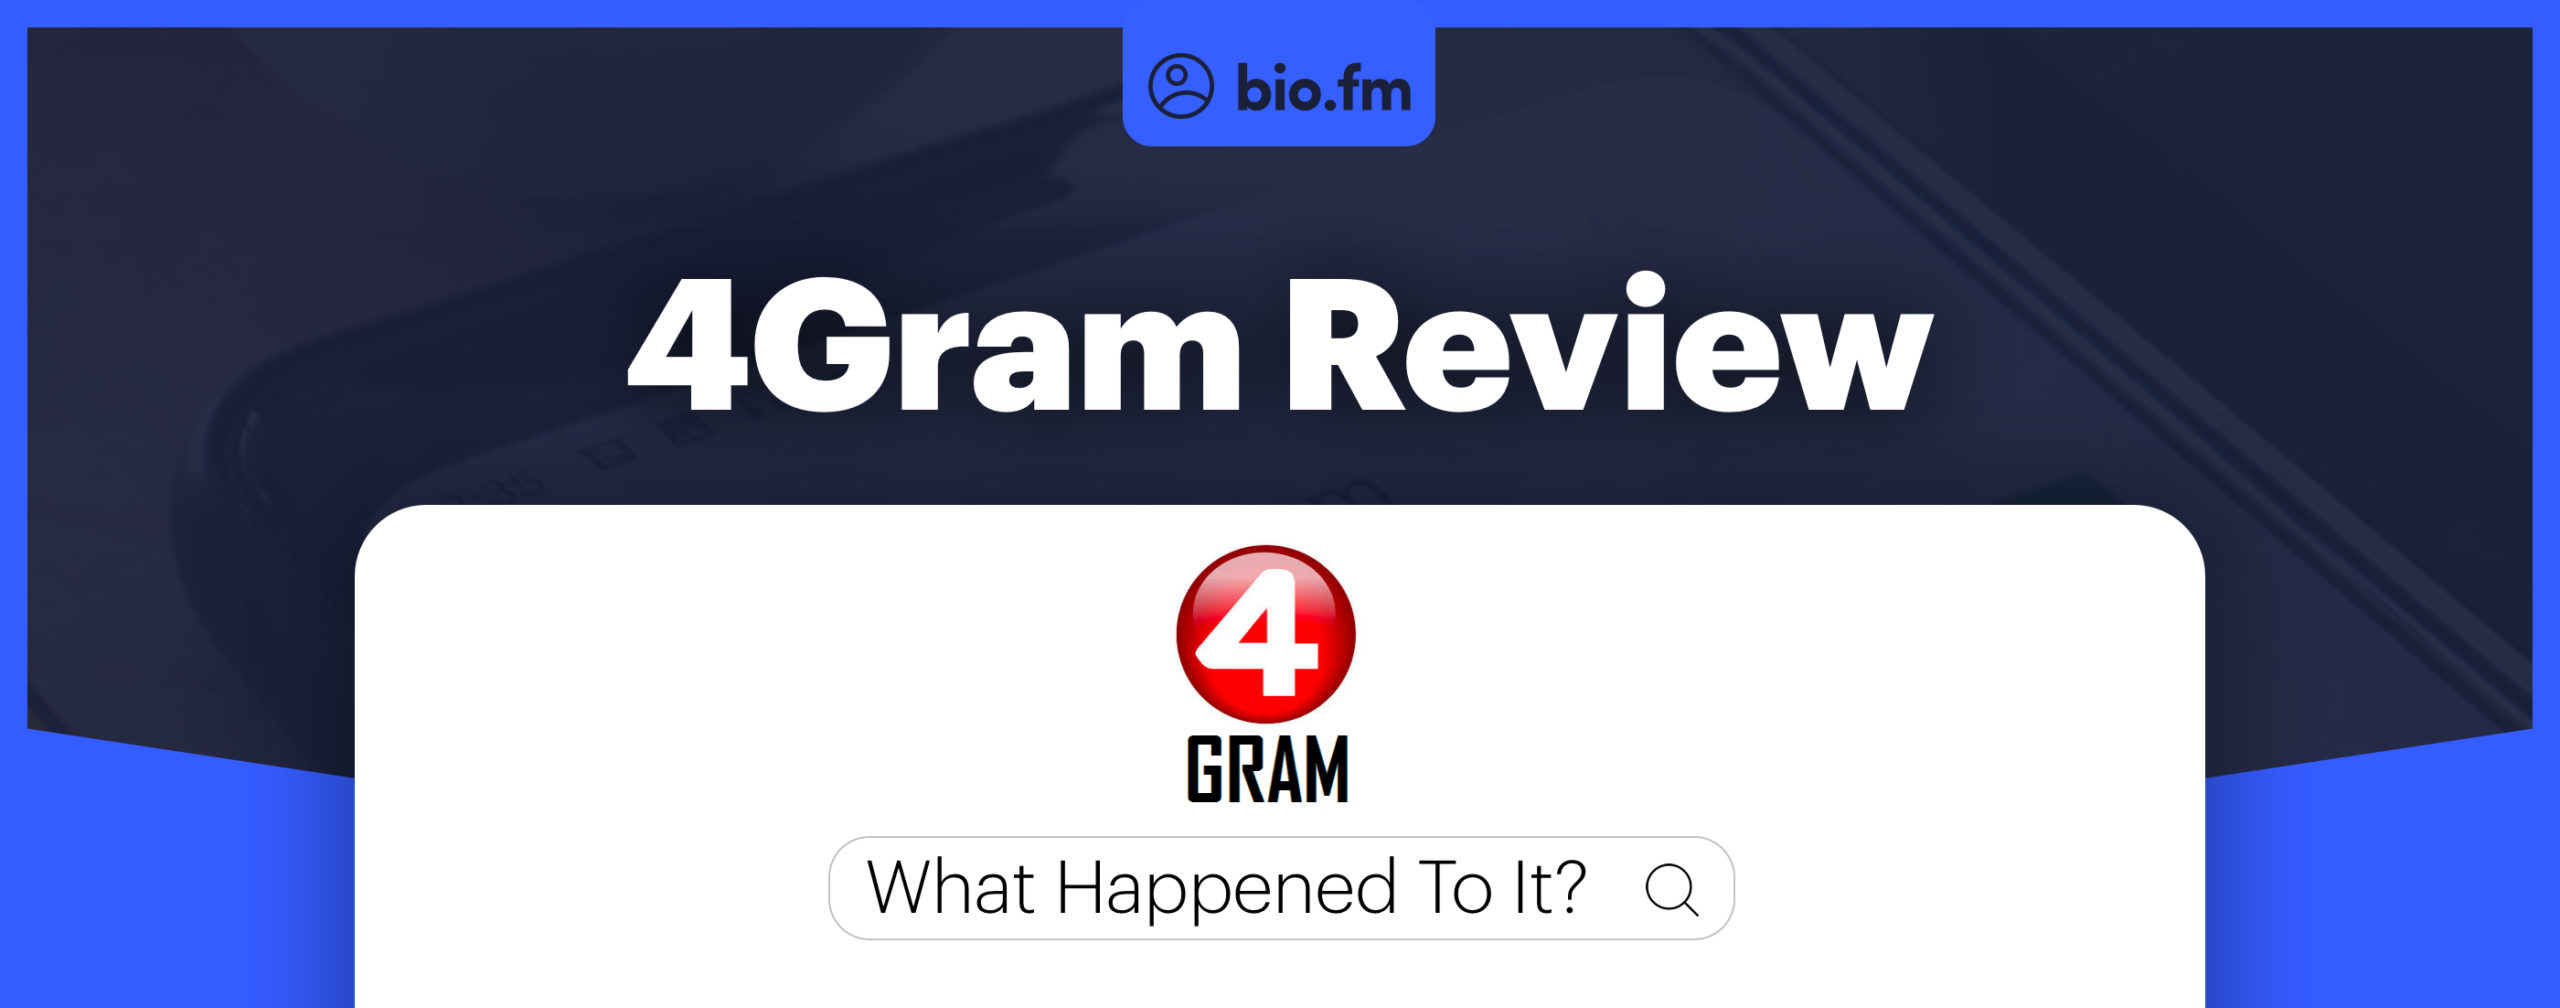 4gram review featured image